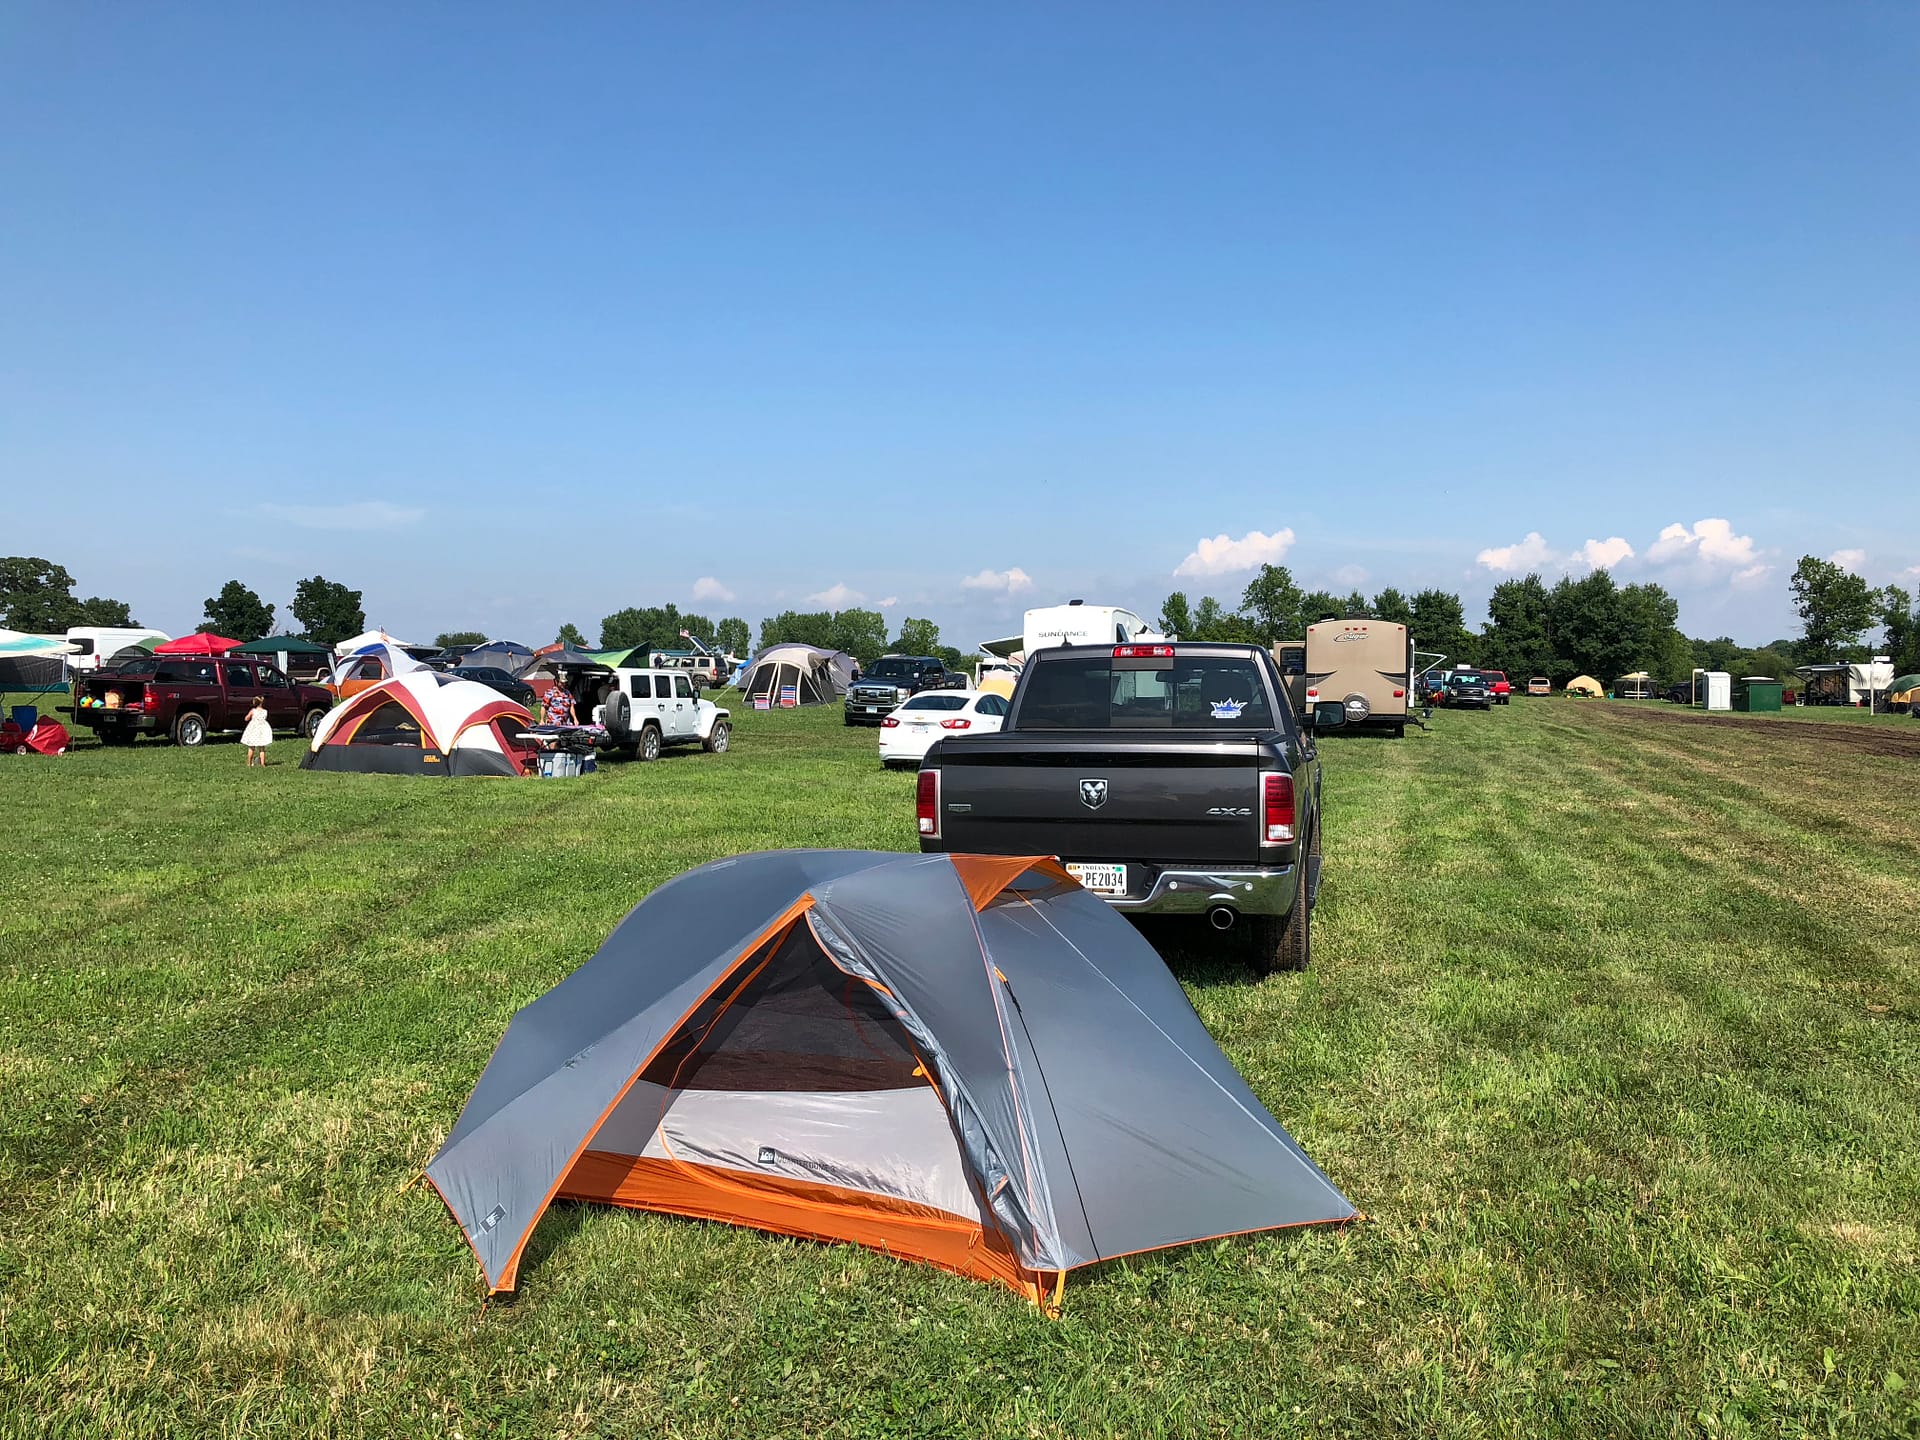 My small REI tent behind my truck - campsite for Oshkosh 2018.